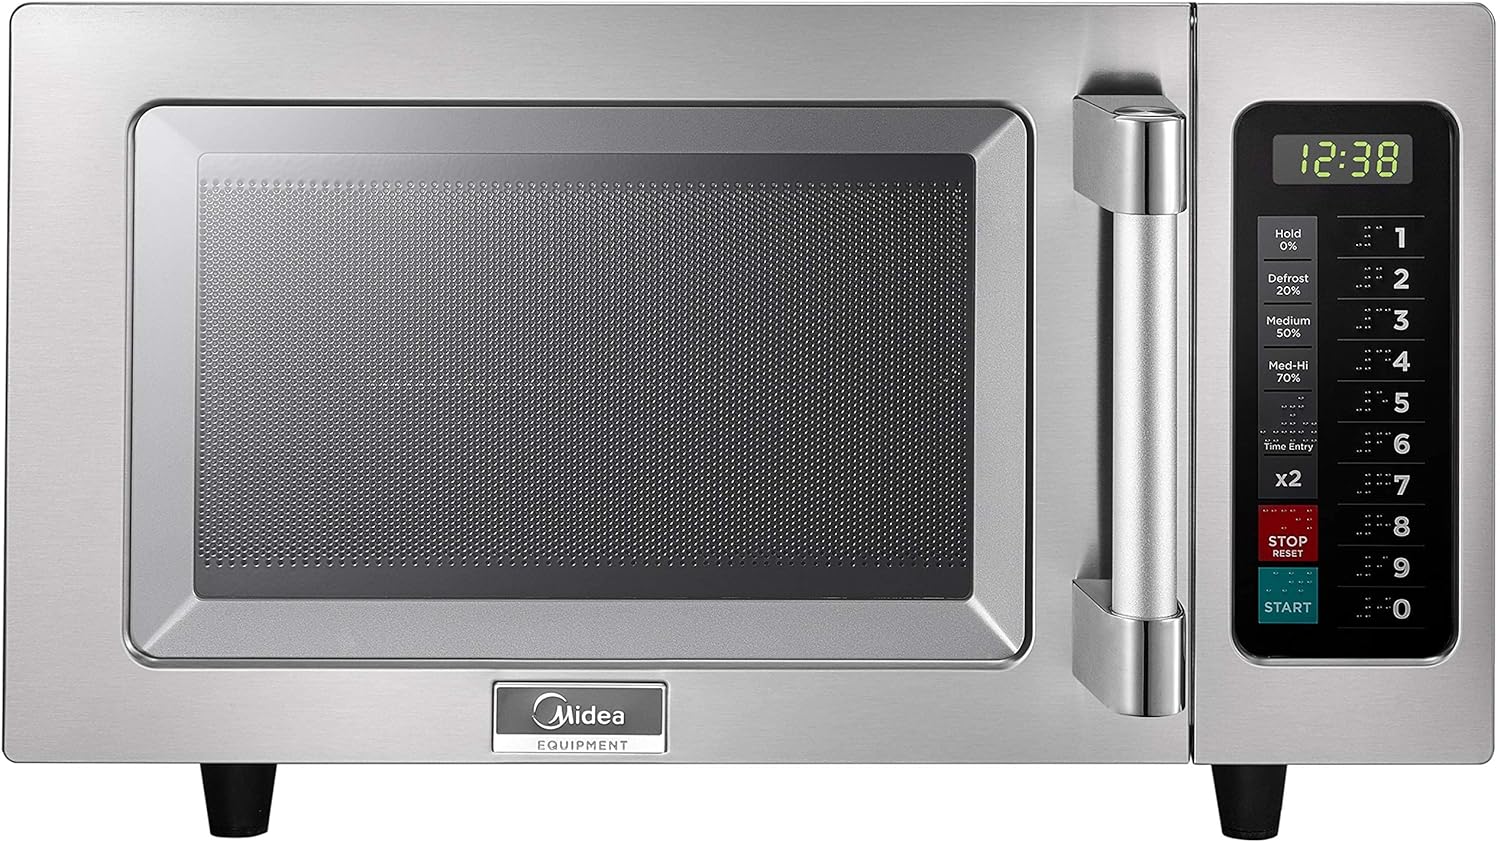 Midea Microwave Oven Review